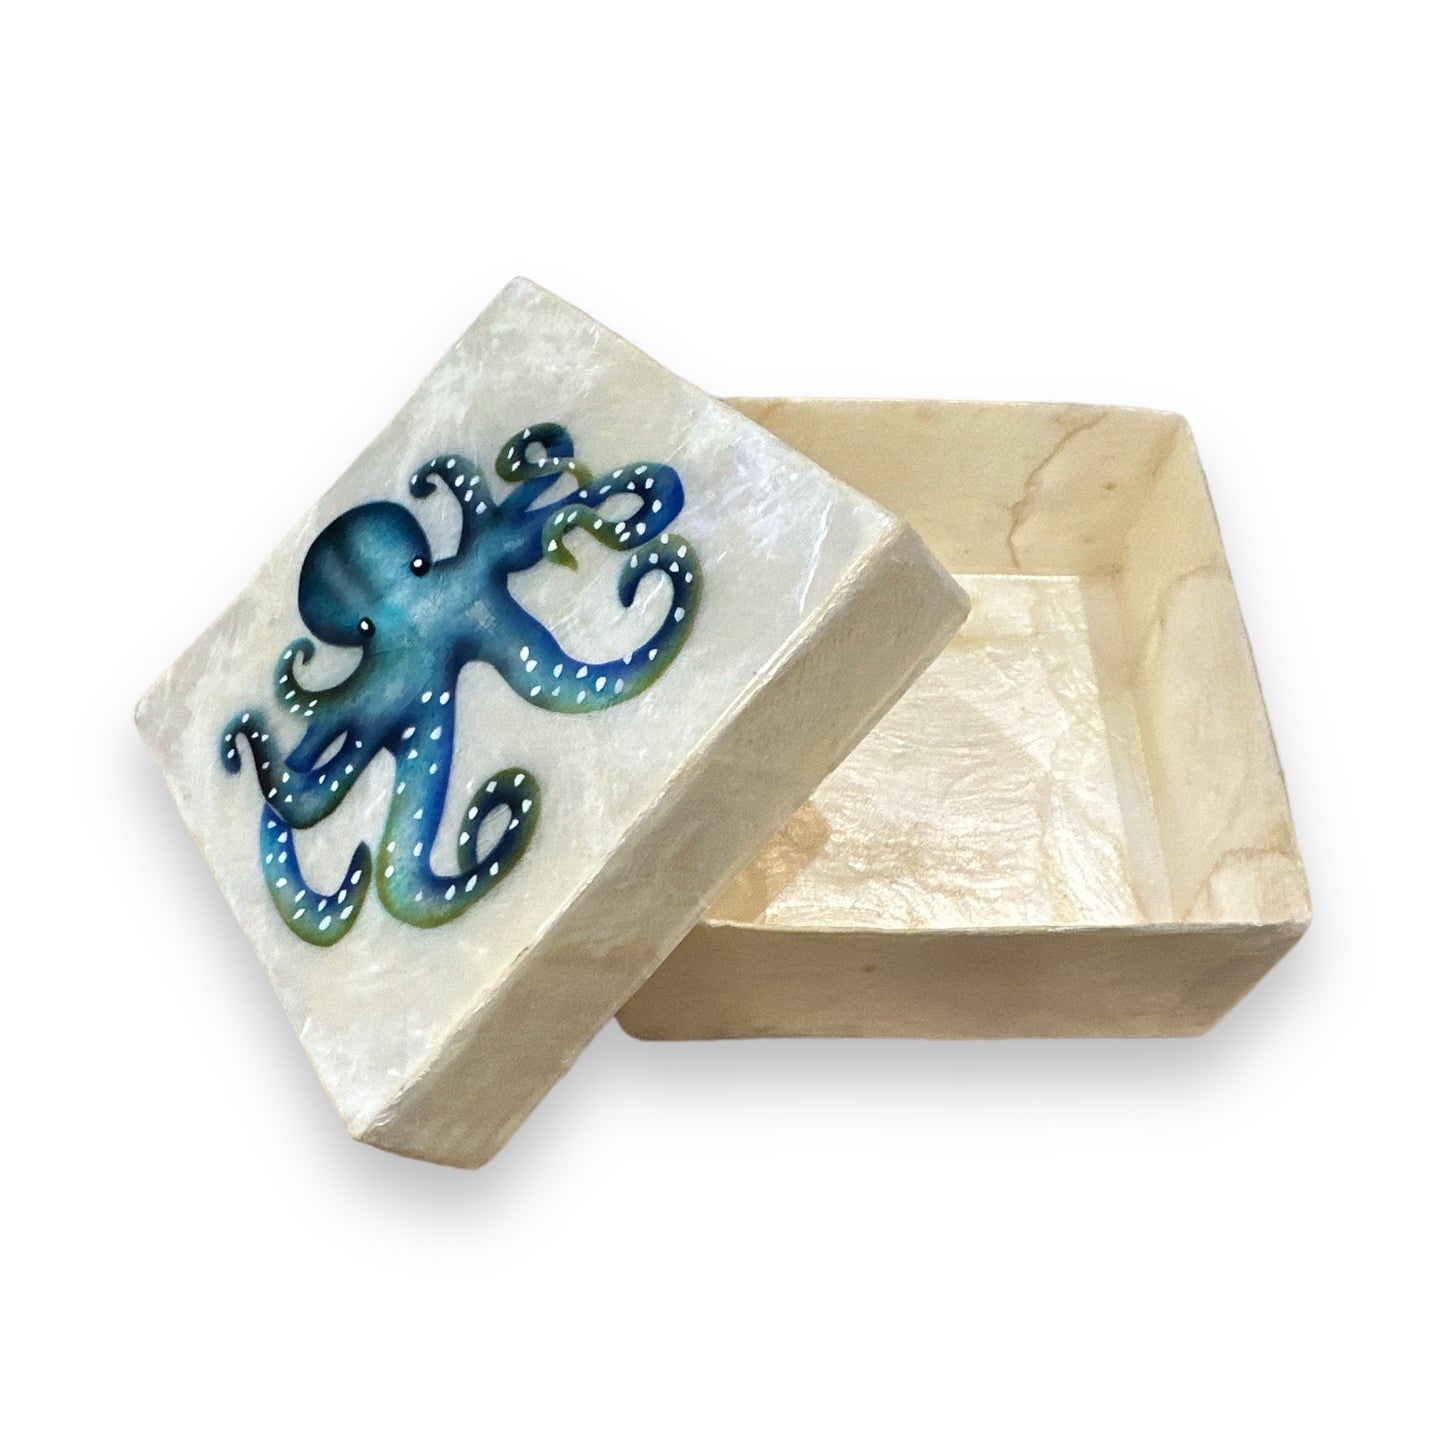 Capiz Box With Blue Painted Octopus - 4-in - Mellow Monkey